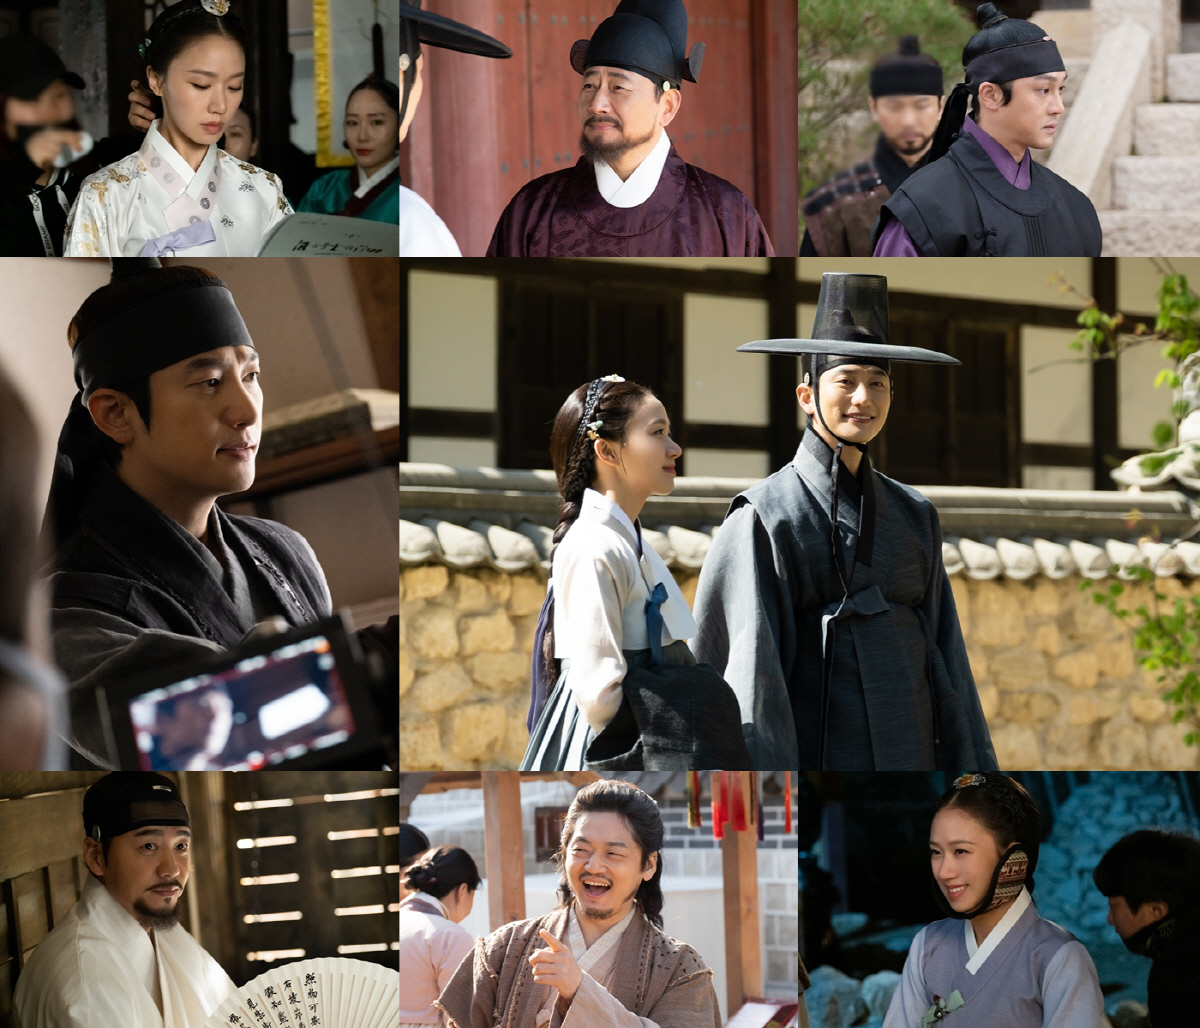 In Wind and Cloud and Rain, Actors Hot Summer Days are drawing favorable reviews, and the behind-the-scenes behind the secrets are being revealed.TV CHOSUN SEKYG Entertainment drama Wind and Cloud and Rain (playplayed by Bang Ji-young / directed by Yoon Sang-ho / production Victory Contents, High Ground) (hereinafter referred to as Wind Cloud Rain) broadcast every Saturday and night at 10:50 pm, has risen to 6.9% (Nielson Korea pay-TV households, national standards), It is firmly established as a drama.The behind-the-scenes cut contains a variety of images of wind cloud actors.First, Park Si-hoo (played by Choi Chun-jung) and Ko Sung-hee (played by Lee Bong-ryun) capture their attention with the new back of Millennium Couple which is showing a heartfelt romance.The warm couple moment outside the camera of two people who are in love with the trials and hardships in the drama is ascending the clown of viewers.Park Si-hoo also shows concentration as it shows the secret of excellent acting every time.I am immersed in the role and I am attracted to the passionate scene that shows the aspect of Choi Chun-jung and synchro rate of 200%.Ko Sung-hee is wearing earplugs in cold weather and is releasing a cute reverse with an open smile.Her flower smile, which reveals the atmosphere of the filming scene in a different way from the role Lee Bong-ryun, makes viewers feel heartbreaking.In addition, Jun Kwang-ryul (played by Lee Ha-eung of Heungseon Daewon-gun) and Kim Seung-soo (played by Kim Byung-woon) are giving off an overwhelming force, creating a room for belief and watching (actor).From sharp eyes to soft laughter, the heavy presence of luxury actors who offer colorful facial changes fills the house theater.In addition, Sung Hyuk (Chae In-gyu), who is doing Hot Summer Days in the face of a wicked man, and Cho Bok-rae (played by Yong-pal-ryong), who is energizing the drama with delight, attract attention.The drama and the atmosphere of the drama are giving roller coaster-class fun to the wind cloud, so expectations for their future activities will increase.As such, Wind Cloud Rain gives a thrilling pleasure every time with actors who give solid acting power, colorful production power, and story that pierces.TV CHOSUN SEKYG Entertainment drama Wind and Cloud and Rain, which is popular with the historical drama gusts, is broadcast every Saturday and night at 10:50 pm.